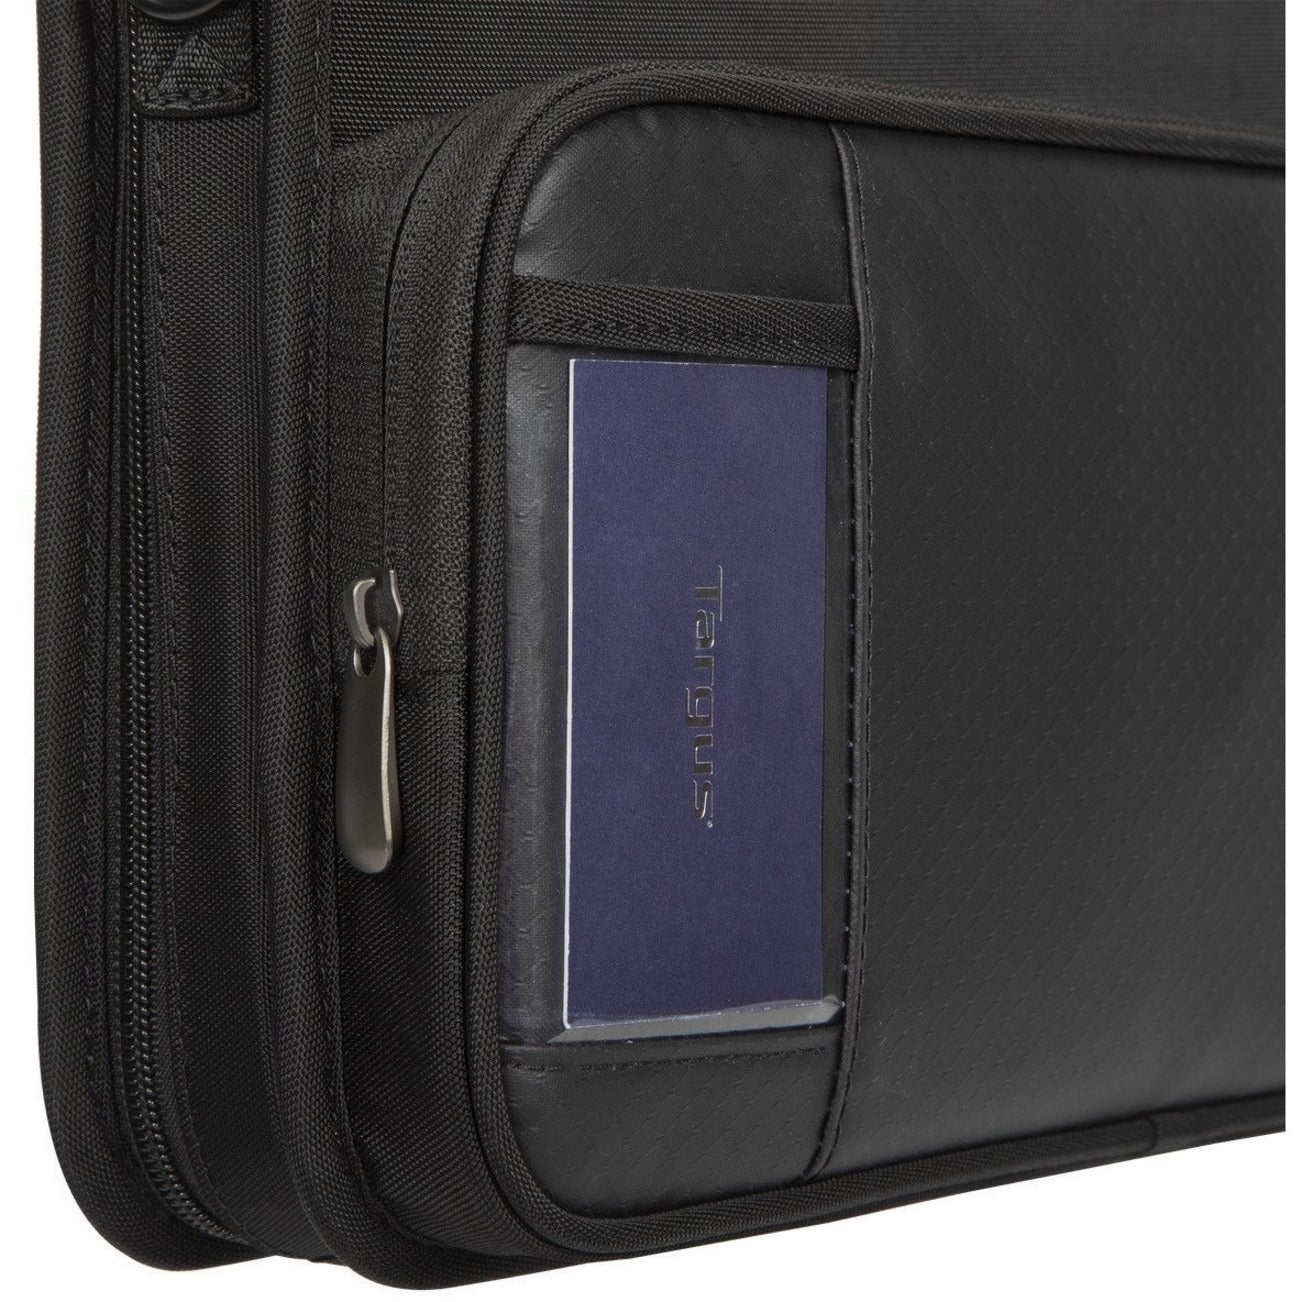 Targus Work-In TKC001 Carrying Case (Briefcase) for 11.6" Notebook Chromebook - Black